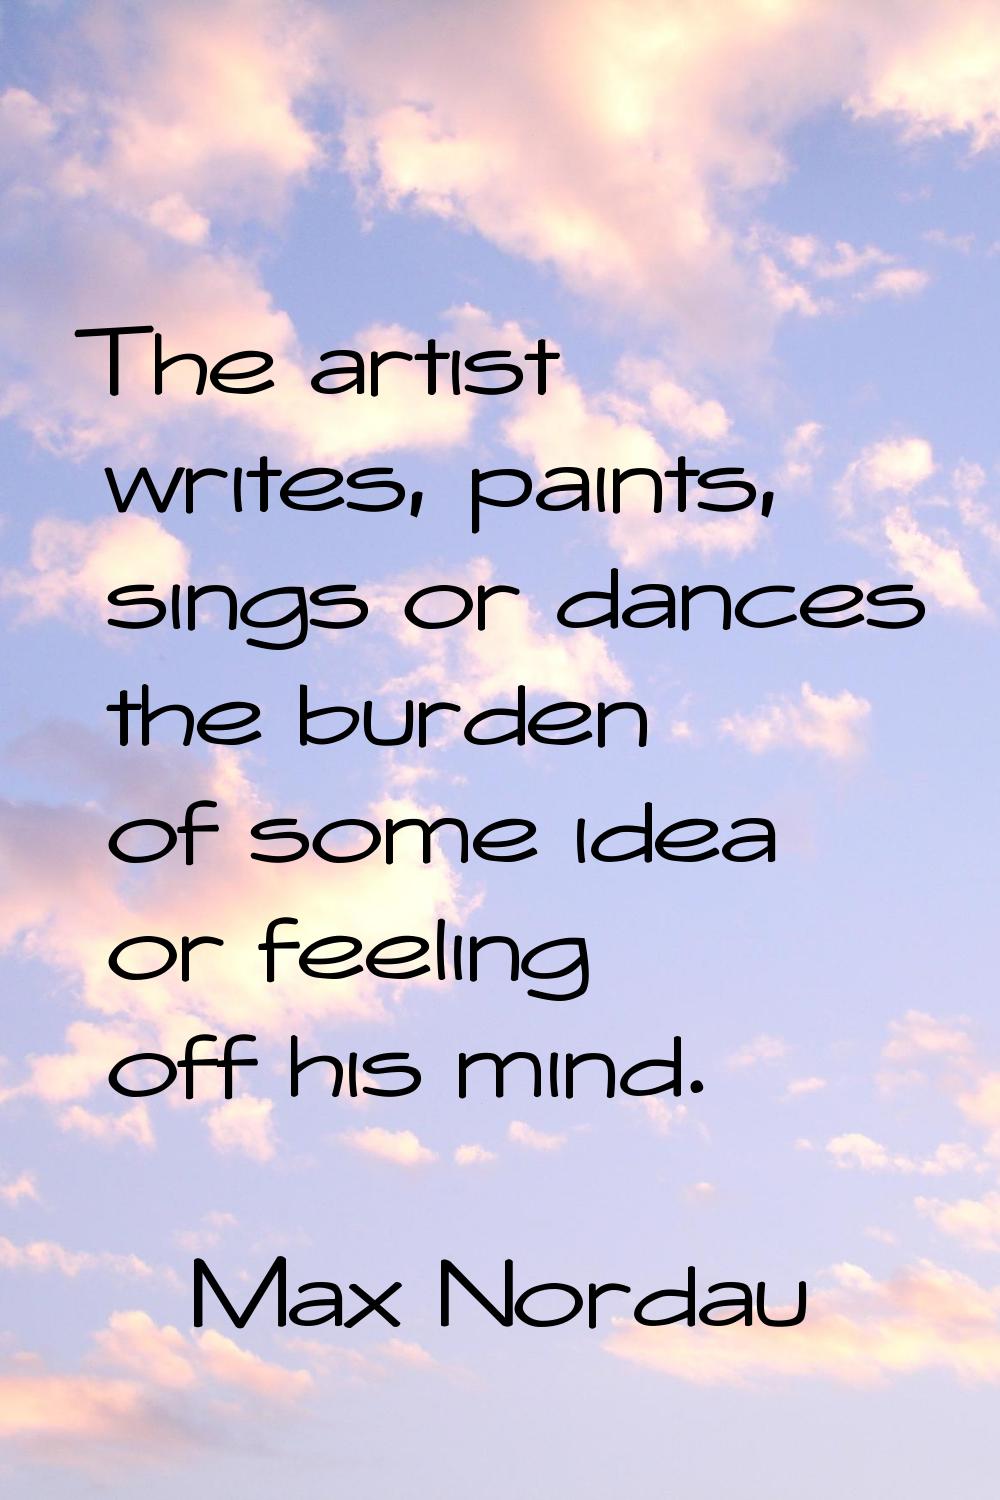 The artist writes, paints, sings or dances the burden of some idea or feeling off his mind.